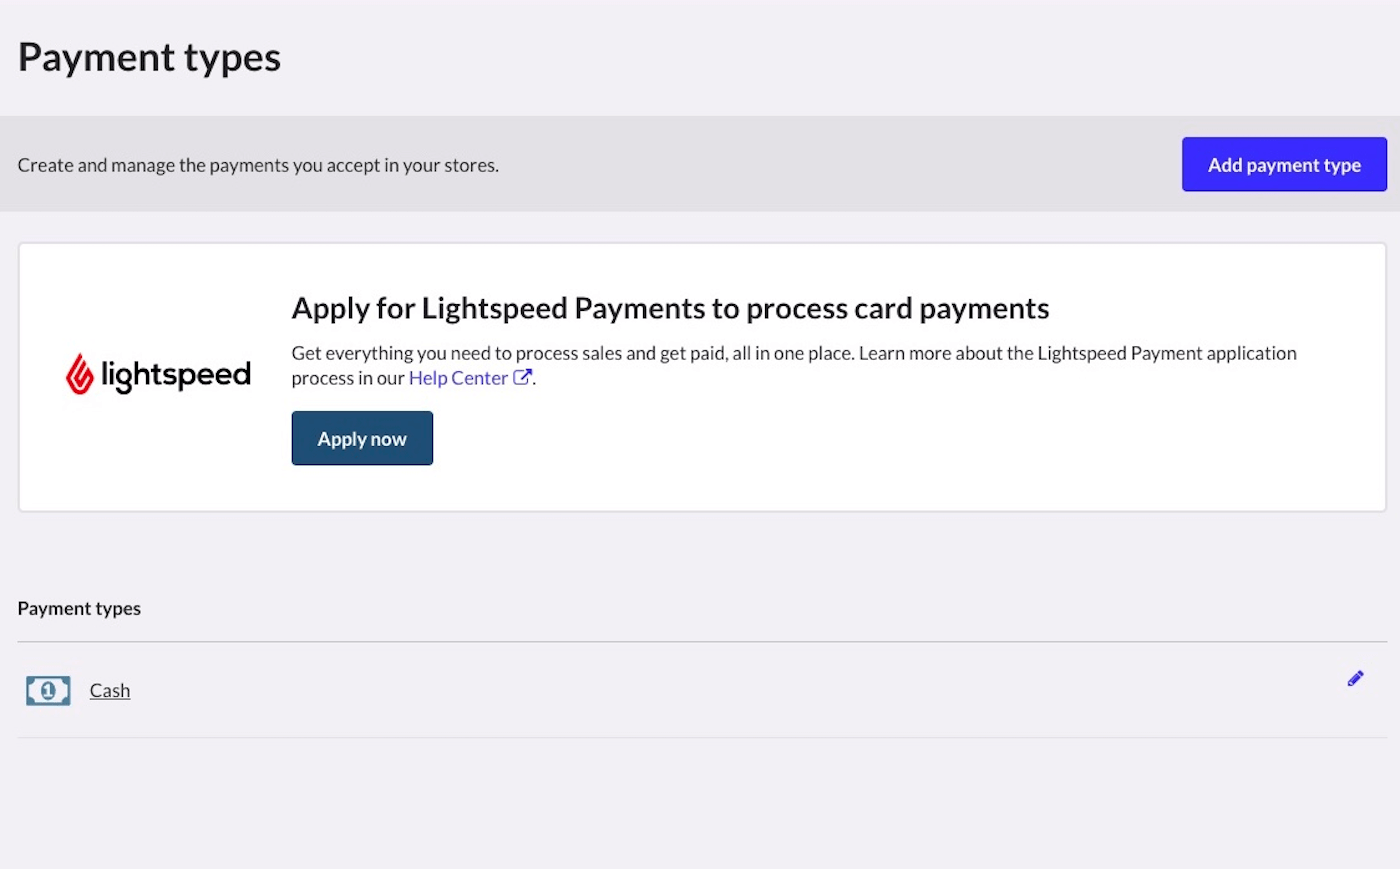 Apply for Lightspeed Payments using the self-serve module under the Payment types section.